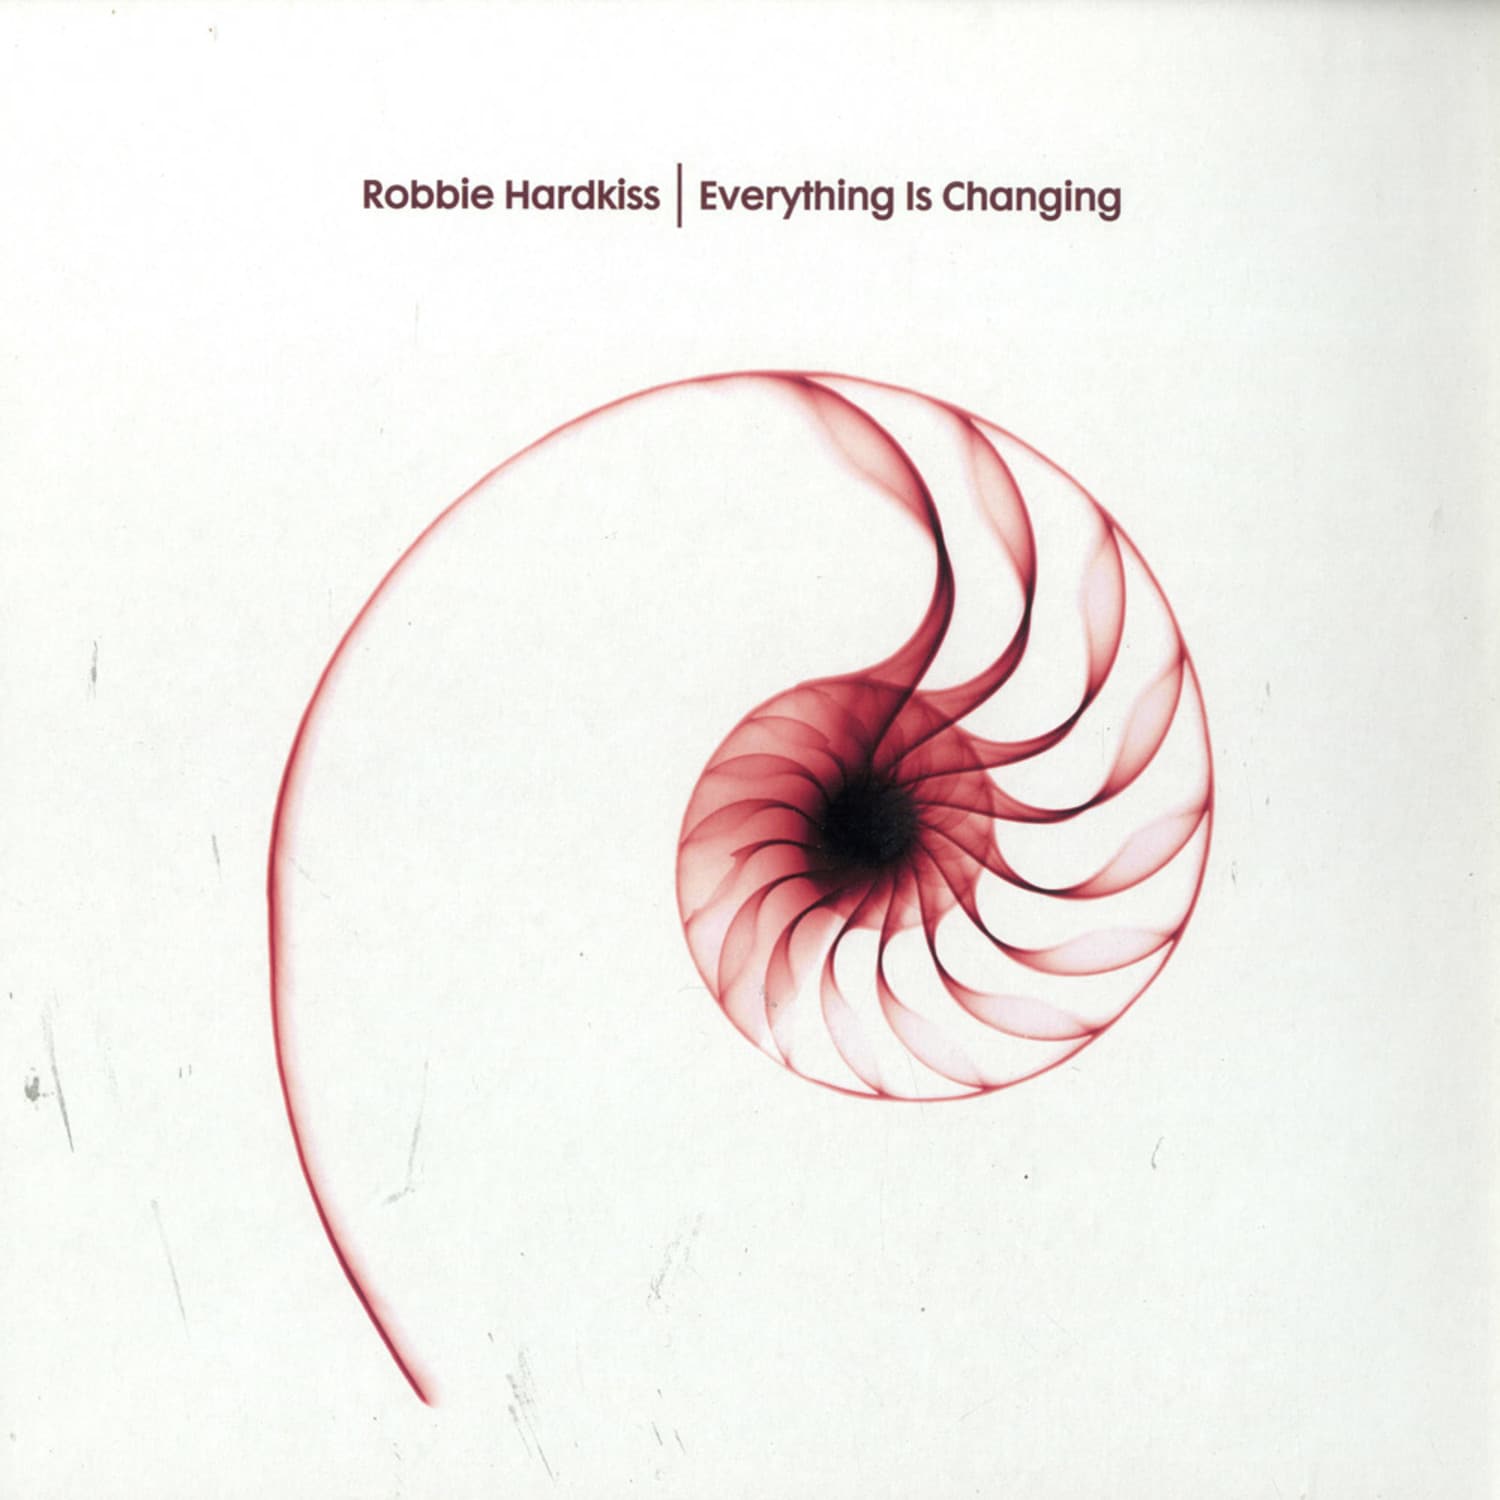 Robbie Hardkiss - EVERYTHING IS CHANGING